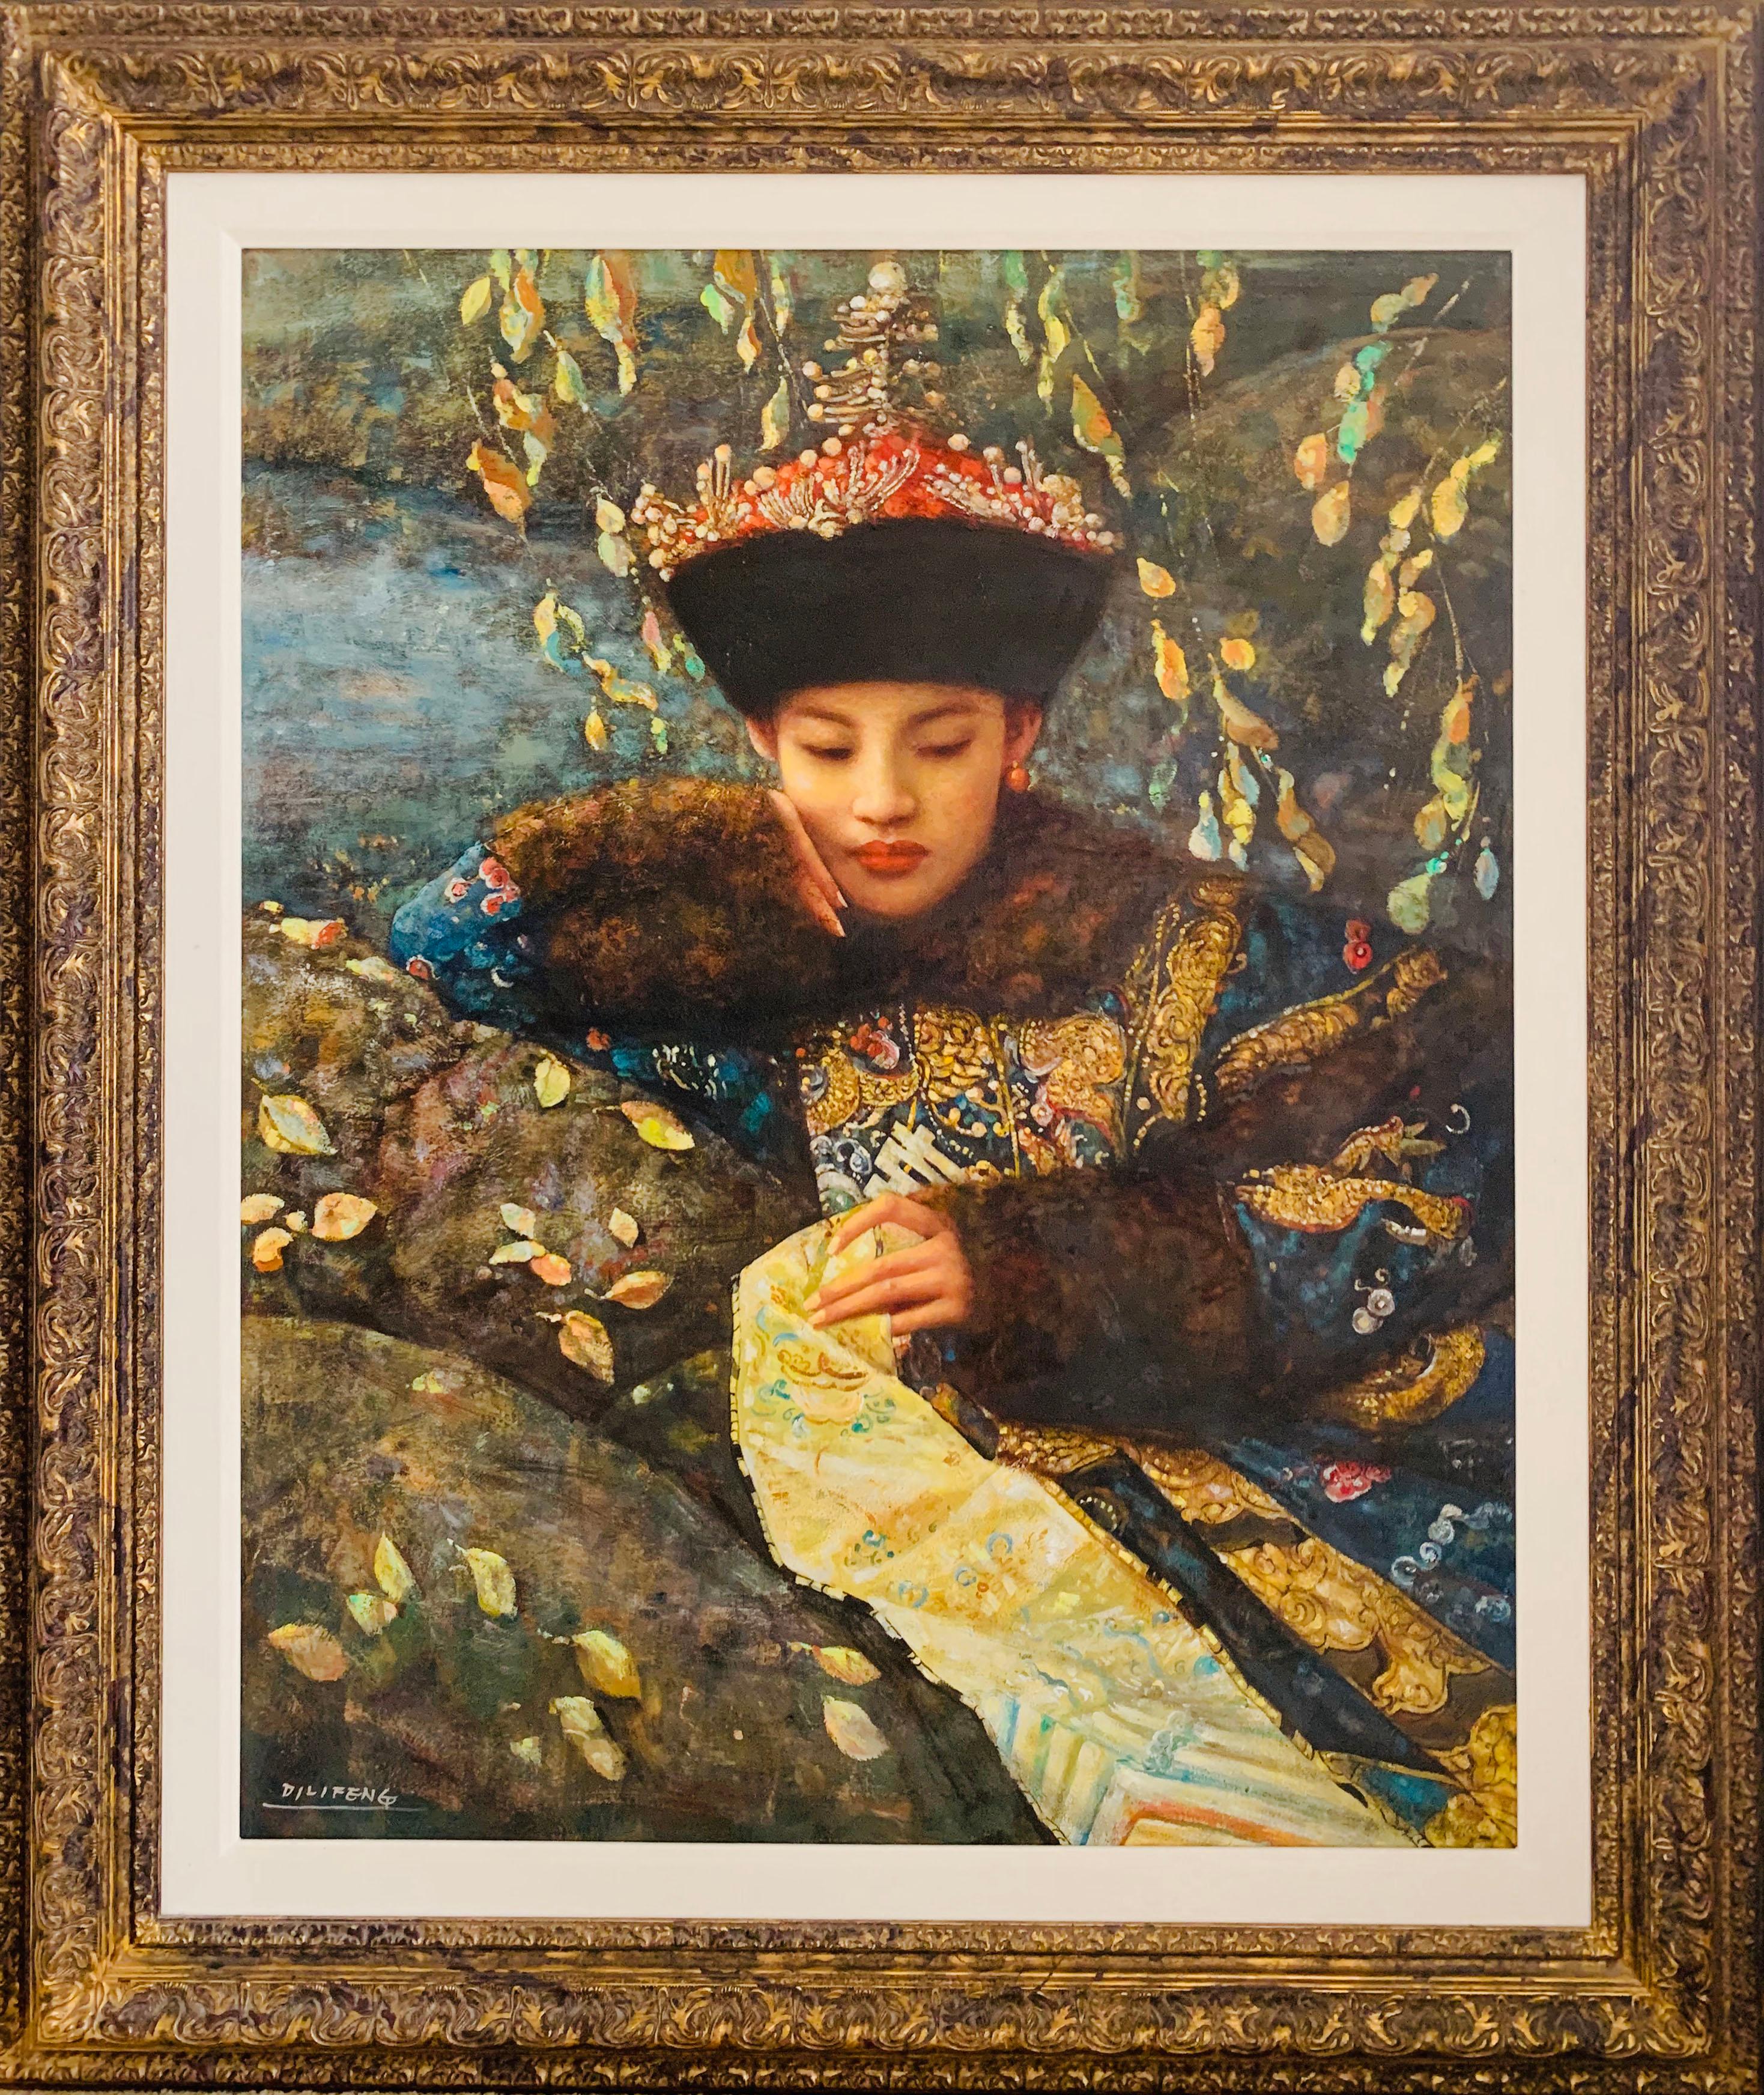 Portrait of Woman by Stream in Traditional Robe and Hat
Di Li Feng, Chinese (1958)
Date: 2001
Oil on Canvas, signed l.l.
Size: 38.5 x 31 in. (97.79 x 78.74 cm)
Frame Size: 51 x 46 inches